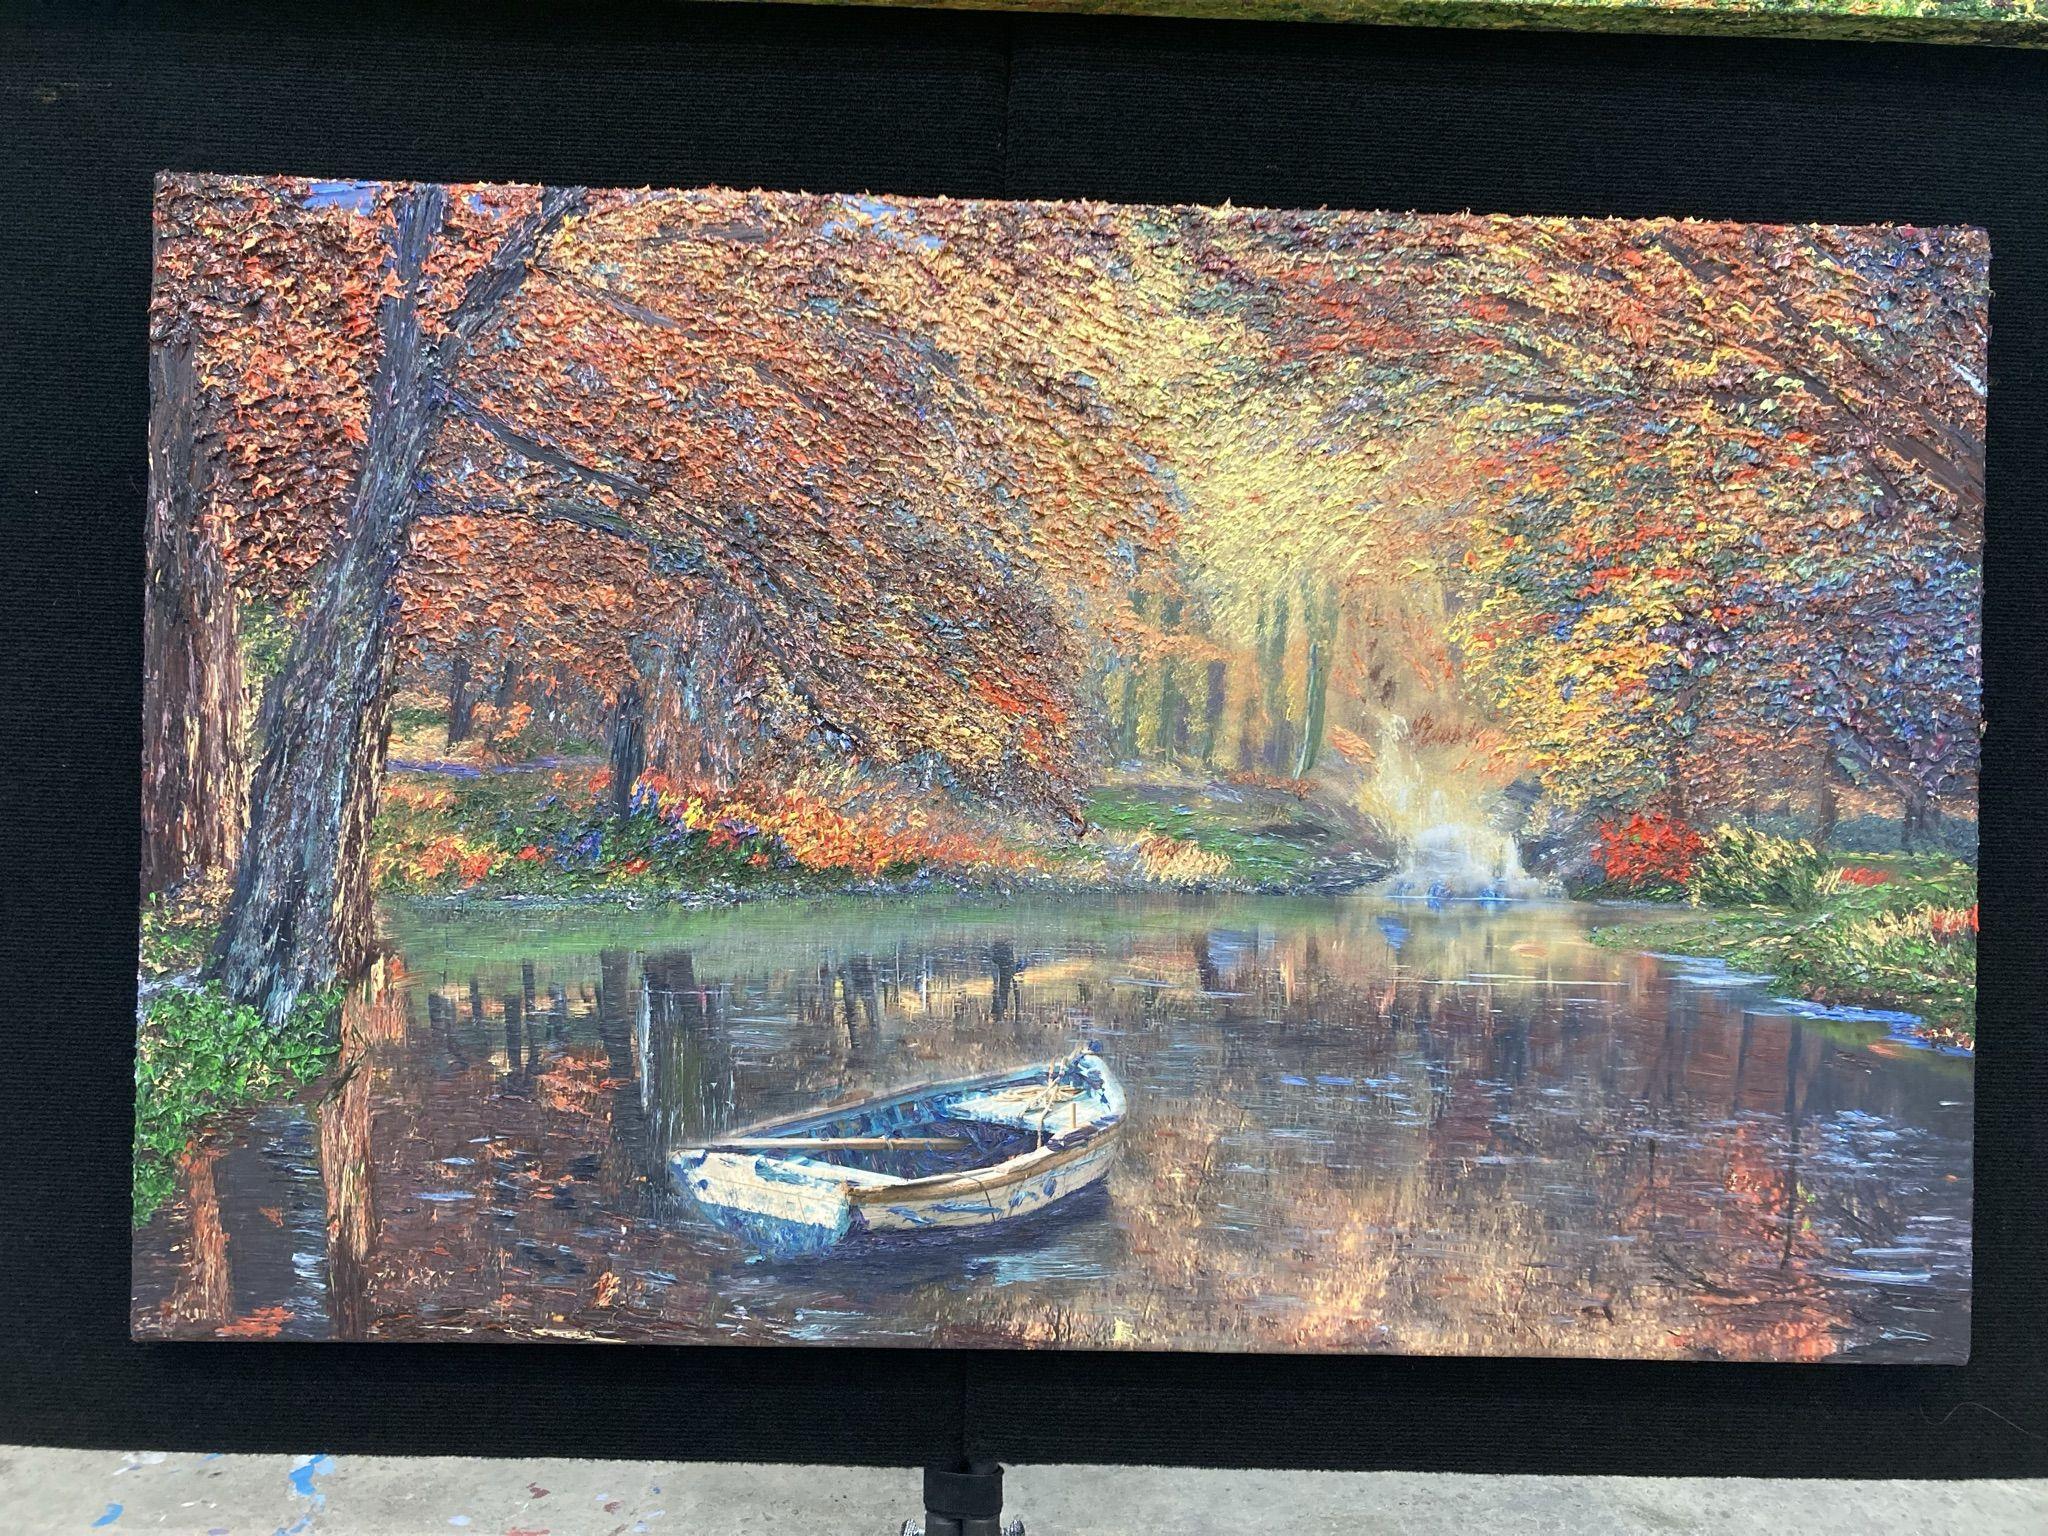 Autumnal colors are radiant in this visage of a reflective scene of the lake, boat, and woodland. The feeling is the nostalgic appreciation that everything has two sides.  The painting is executed in Clear Impressionism style in thick oils with